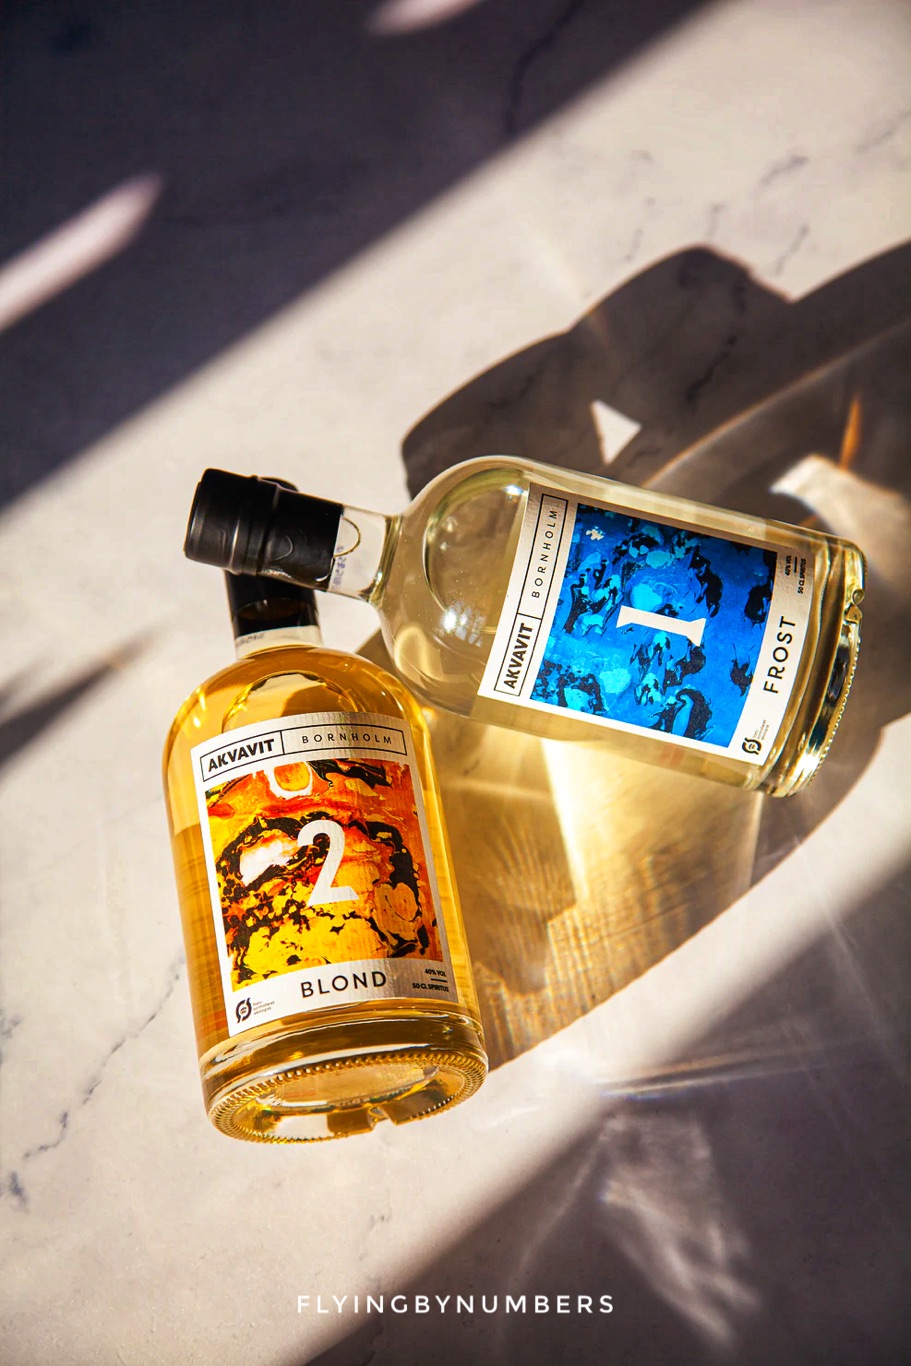 Miniature luxury spirit bottles from aircraft duty free stores